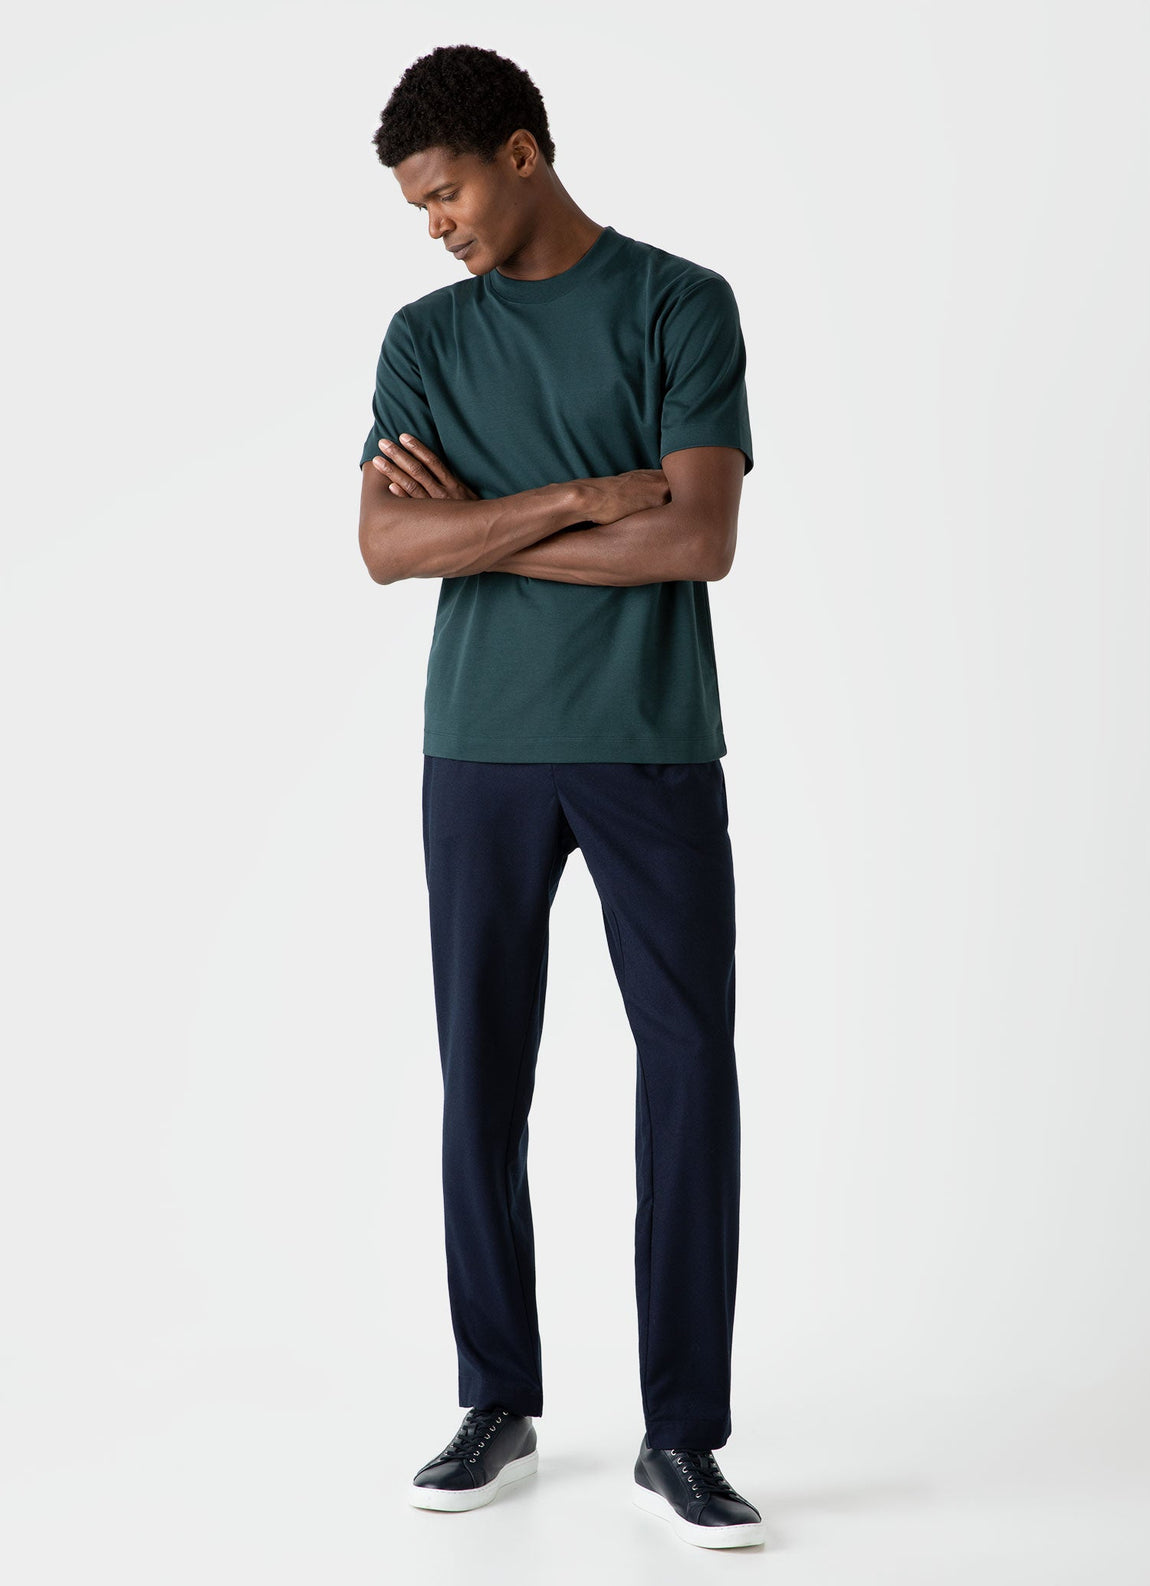 Men's Brushed Cotton T-shirt in Peacock